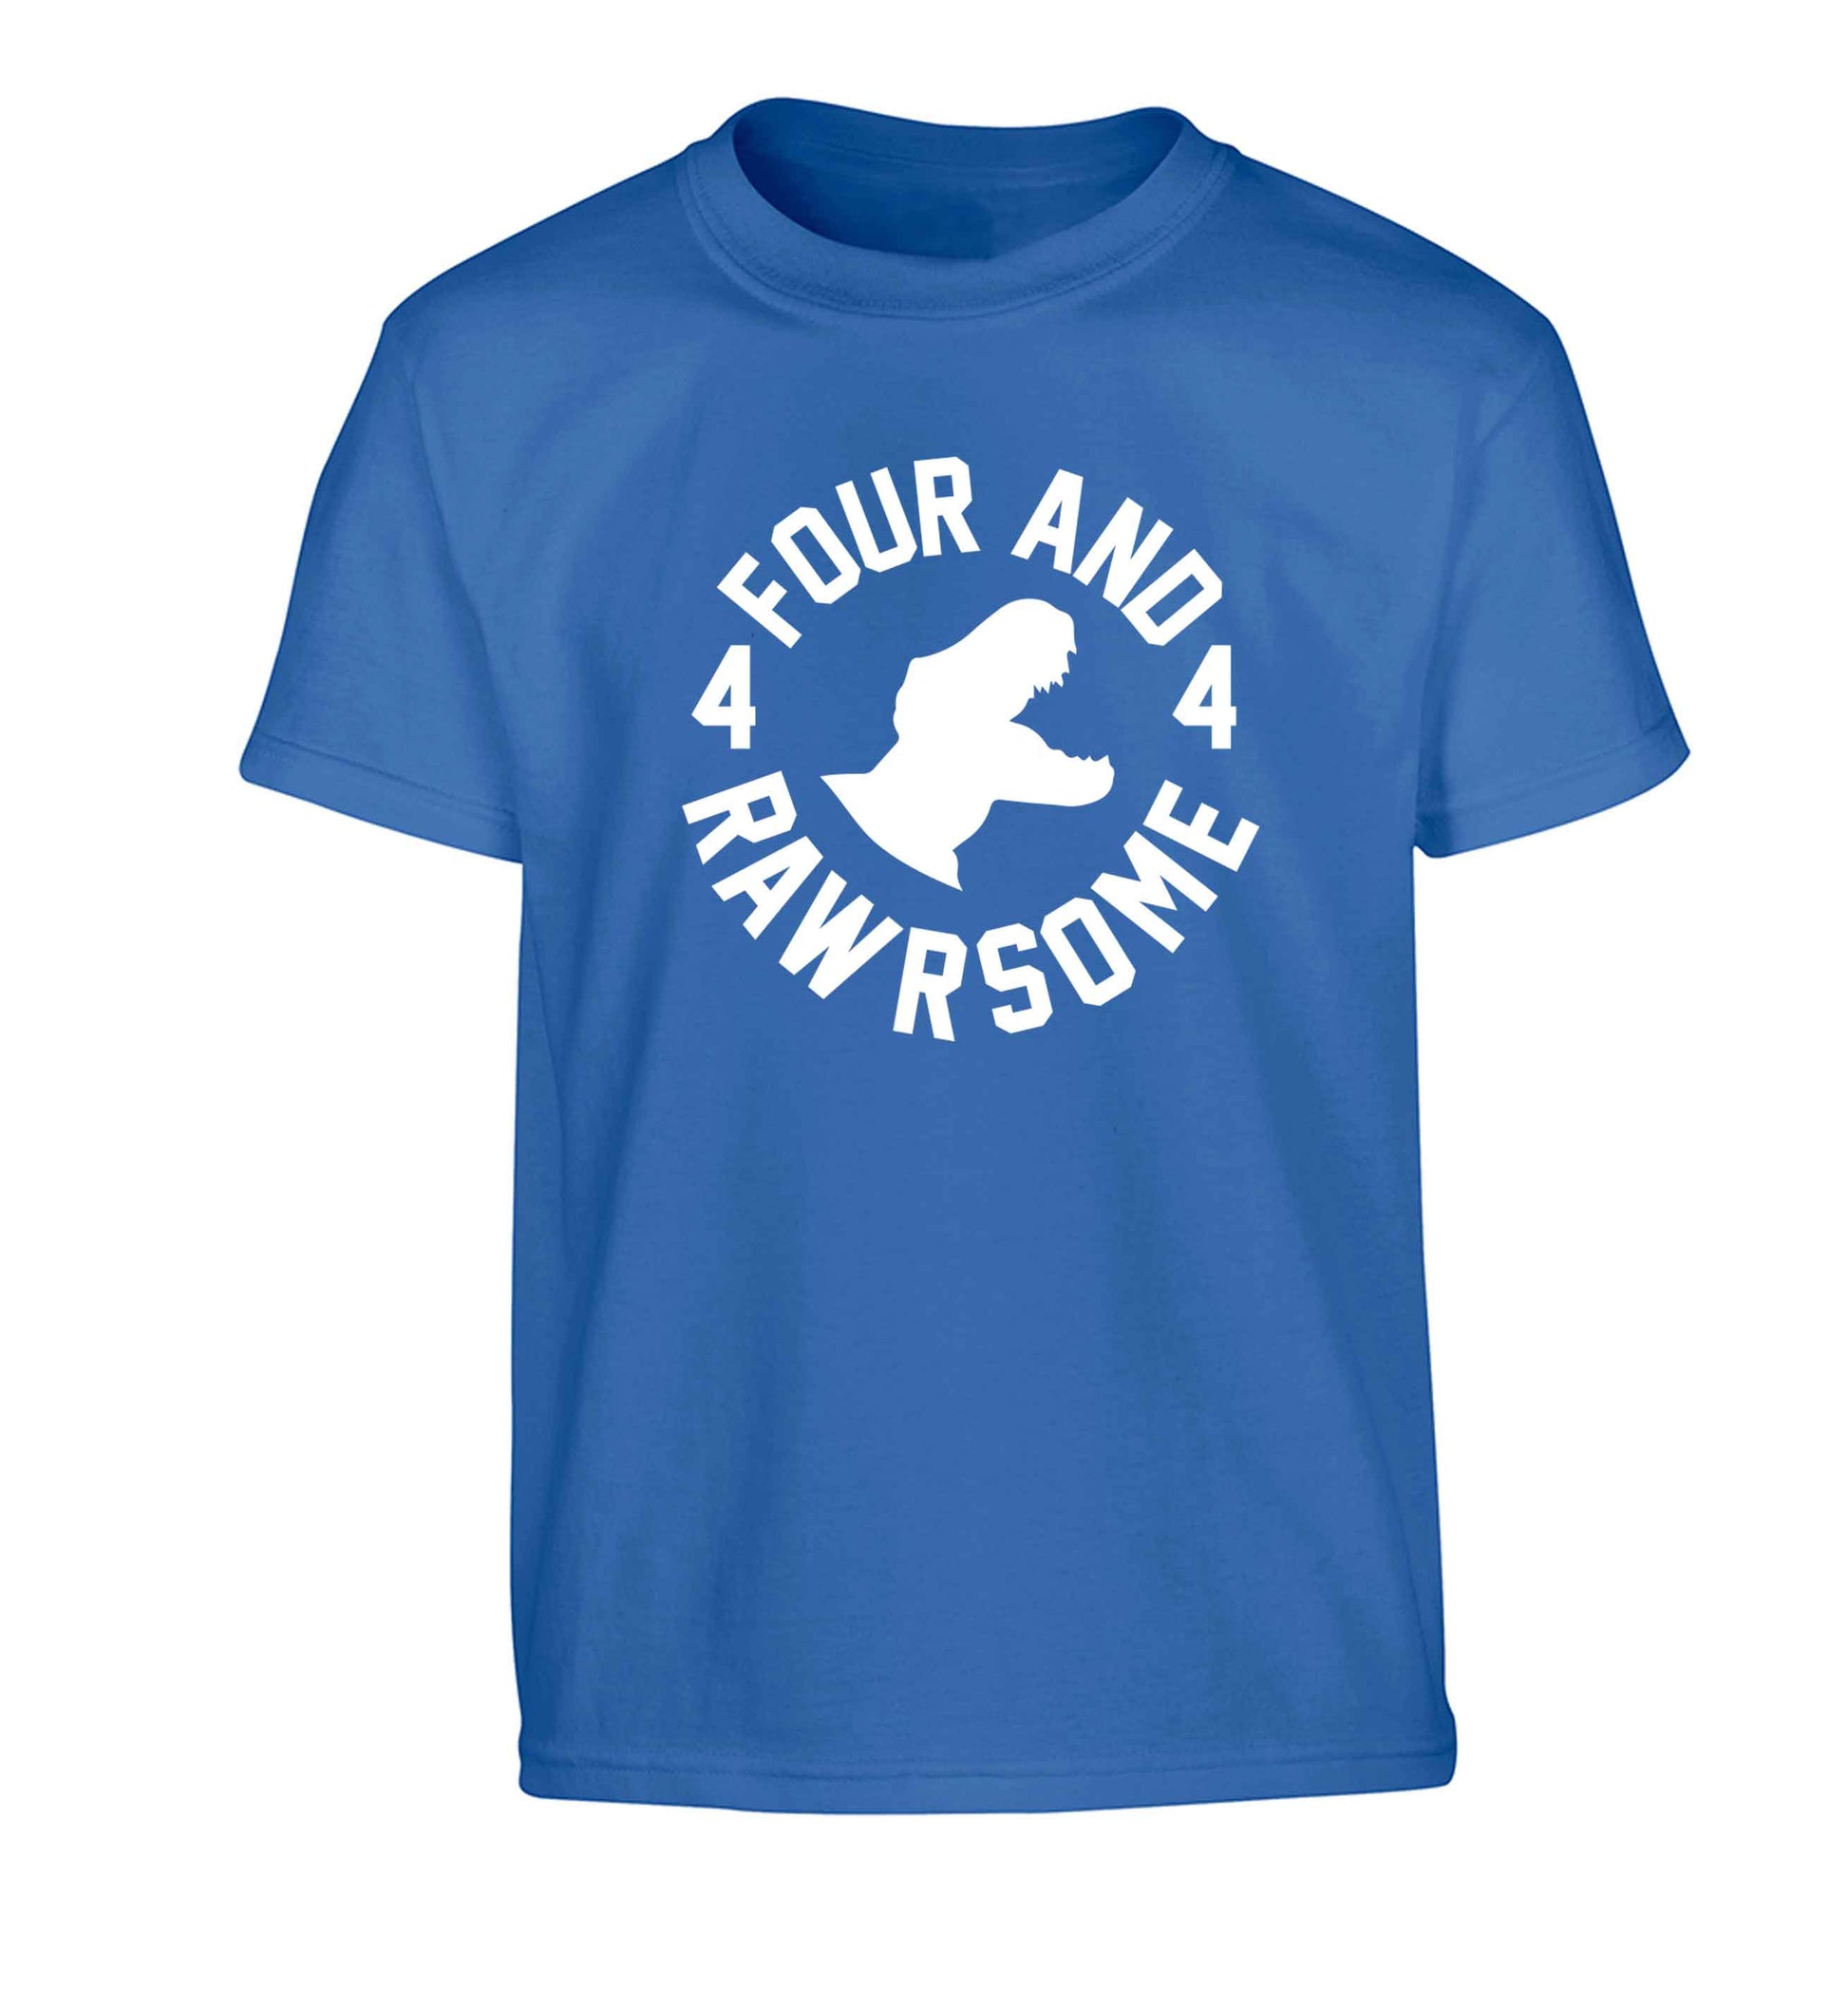 Four and rawrsome Children's blue Tshirt 12-13 Years